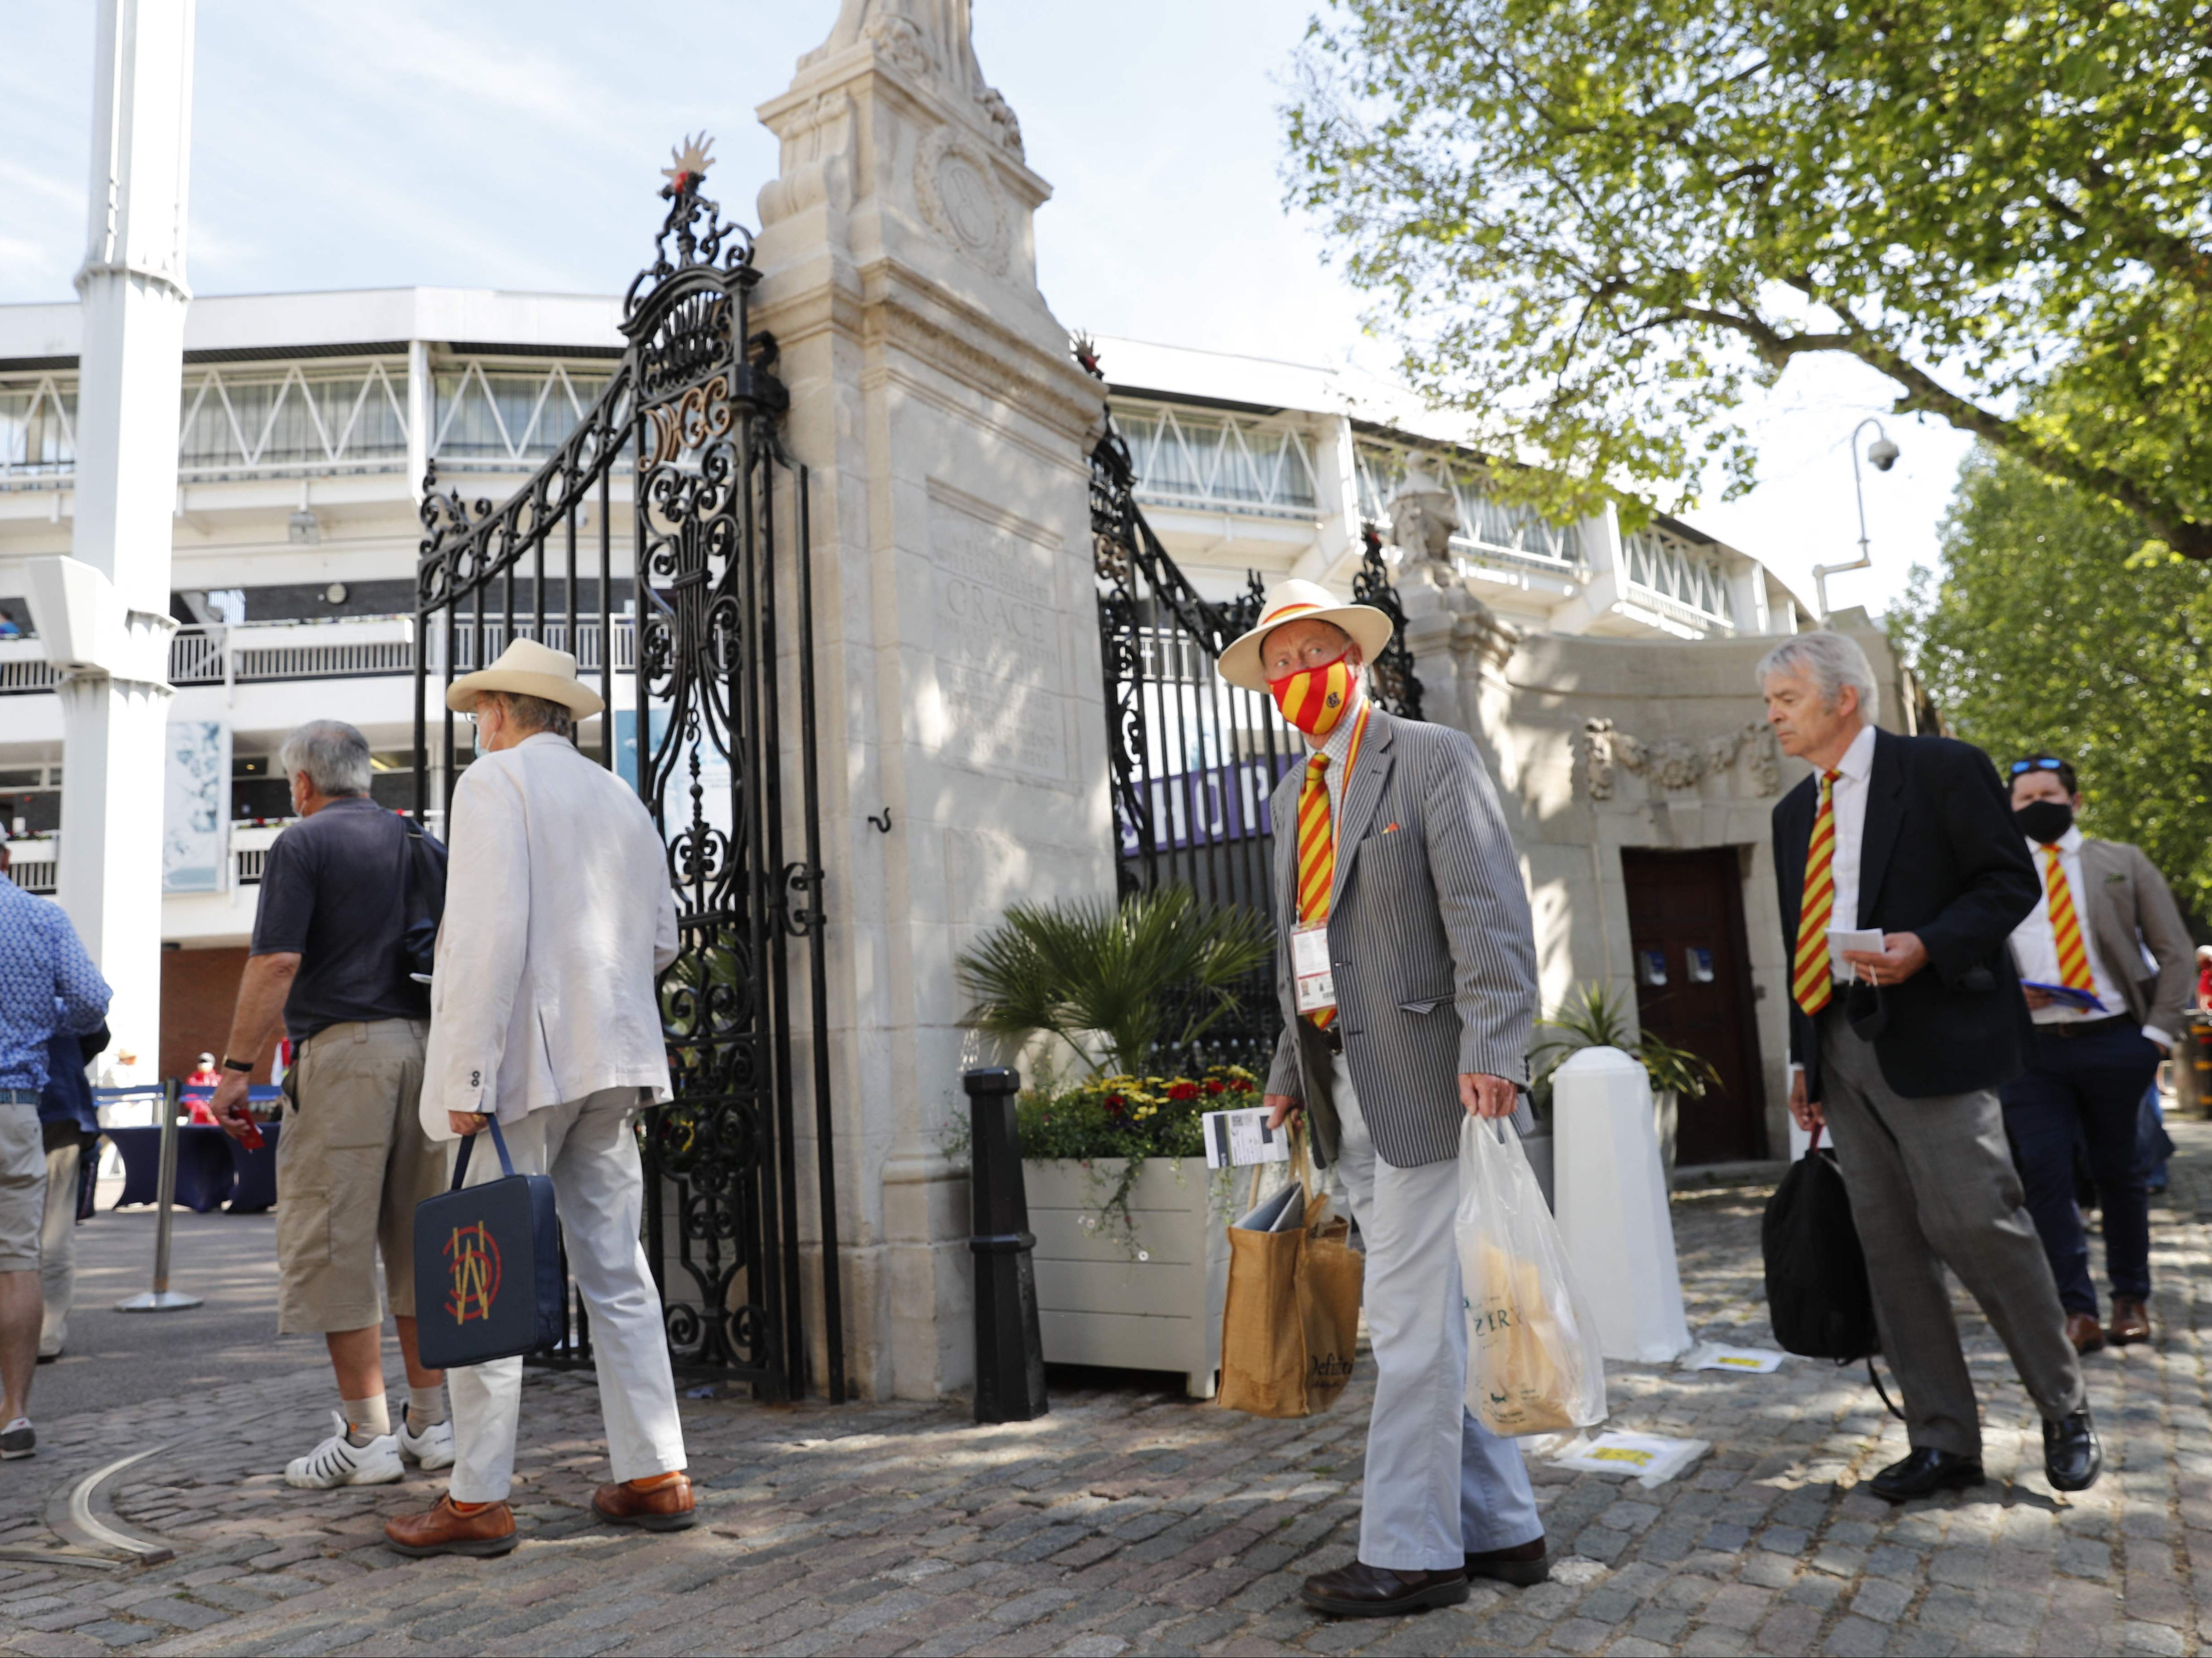 Spectators returned to Lord’s on Wednesday